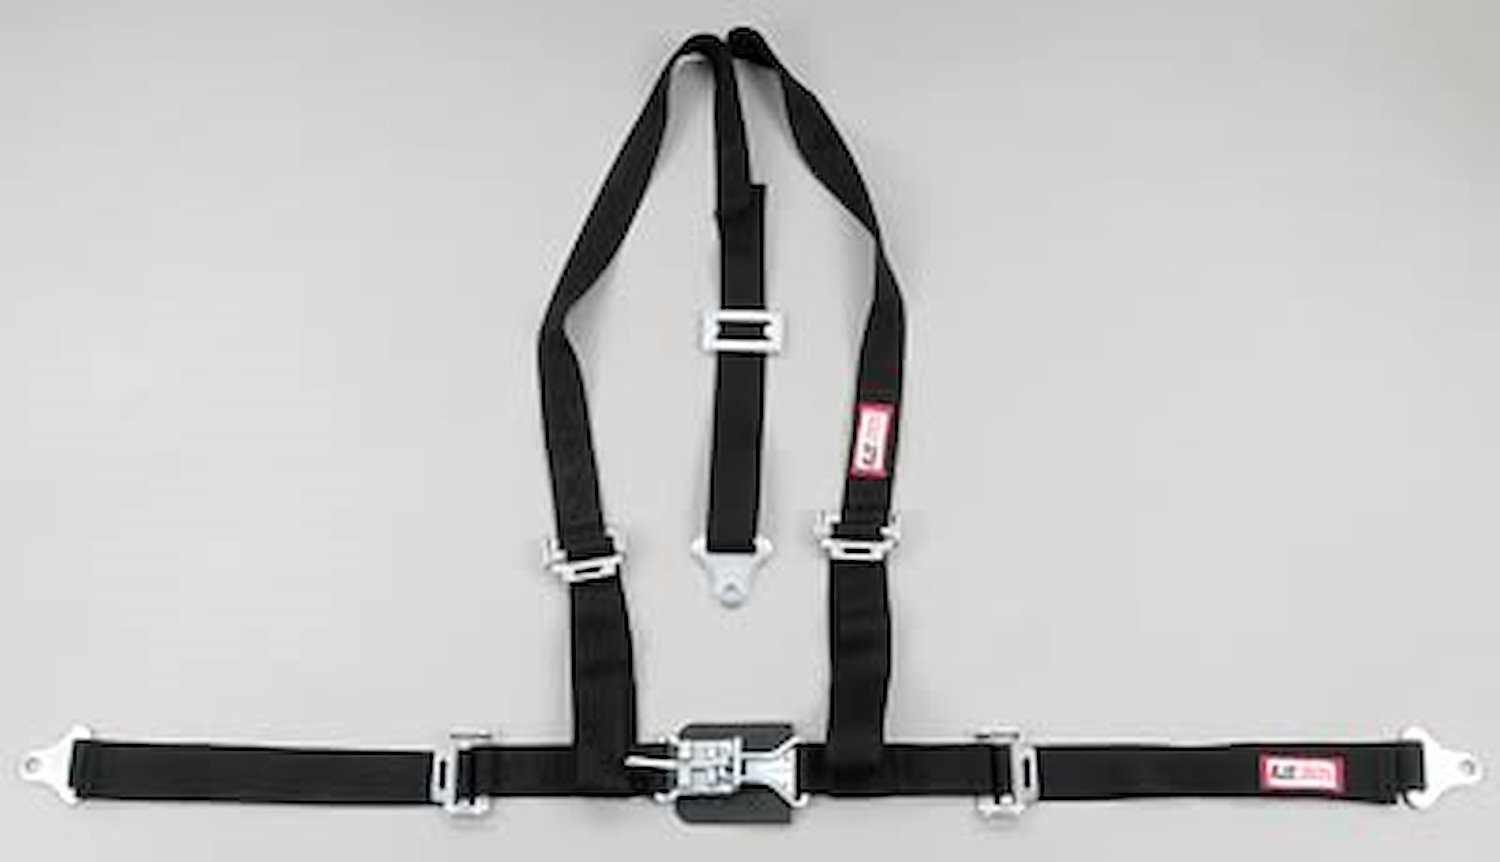 NON-SFI L&L HARNESS 2 PULL UP Lap Belt SEWN IN 2 S.H. Y FLOOR Mount w/STERNUM STRAP ALL WRAP ENDS OD GREEN